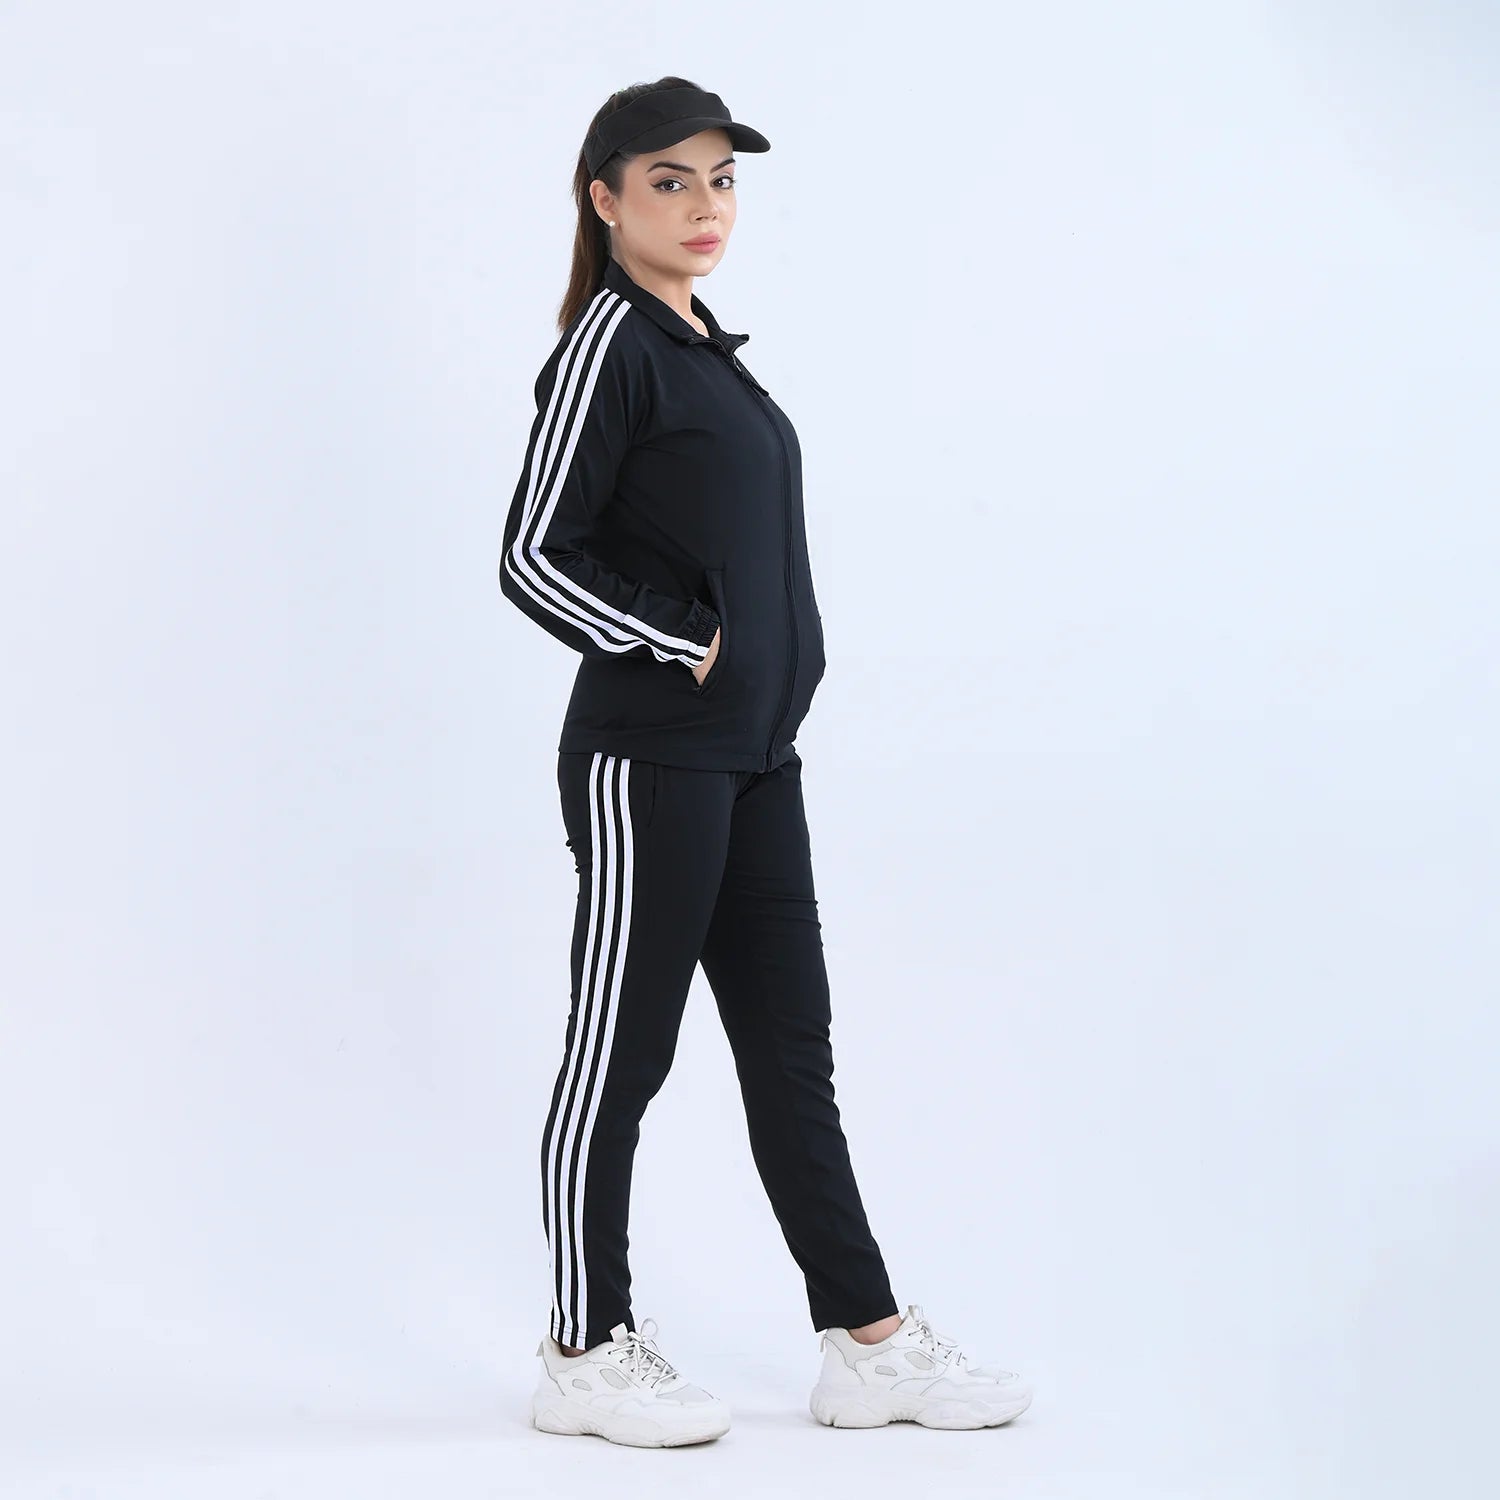 Buy Black Gym Tracksuit with Stripes For Women at Lowest Price in Pakistan